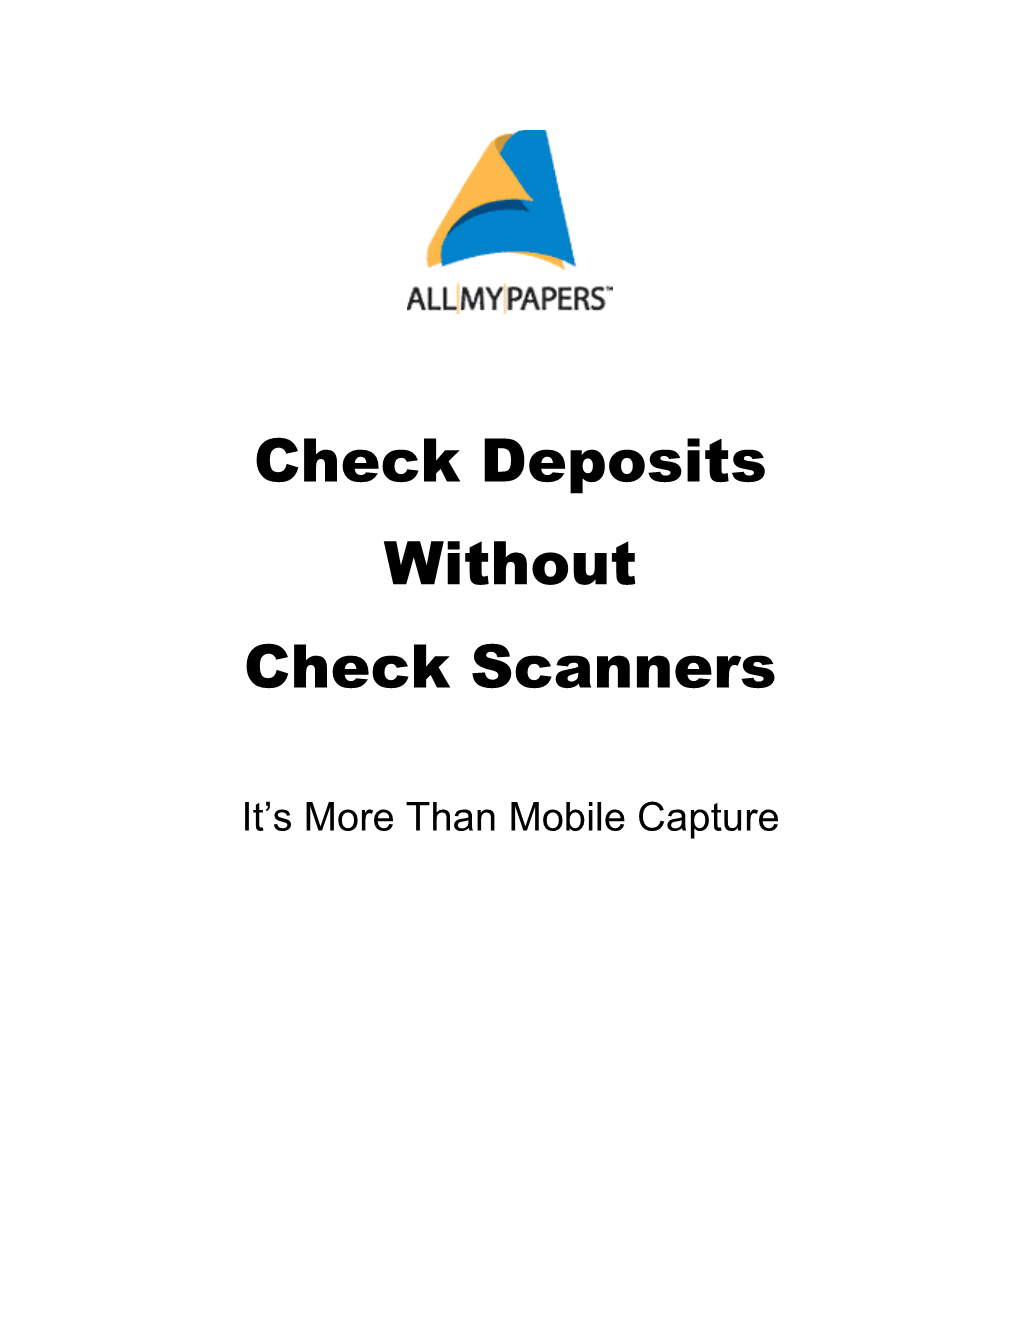 Check Deposits Without Check Scanners